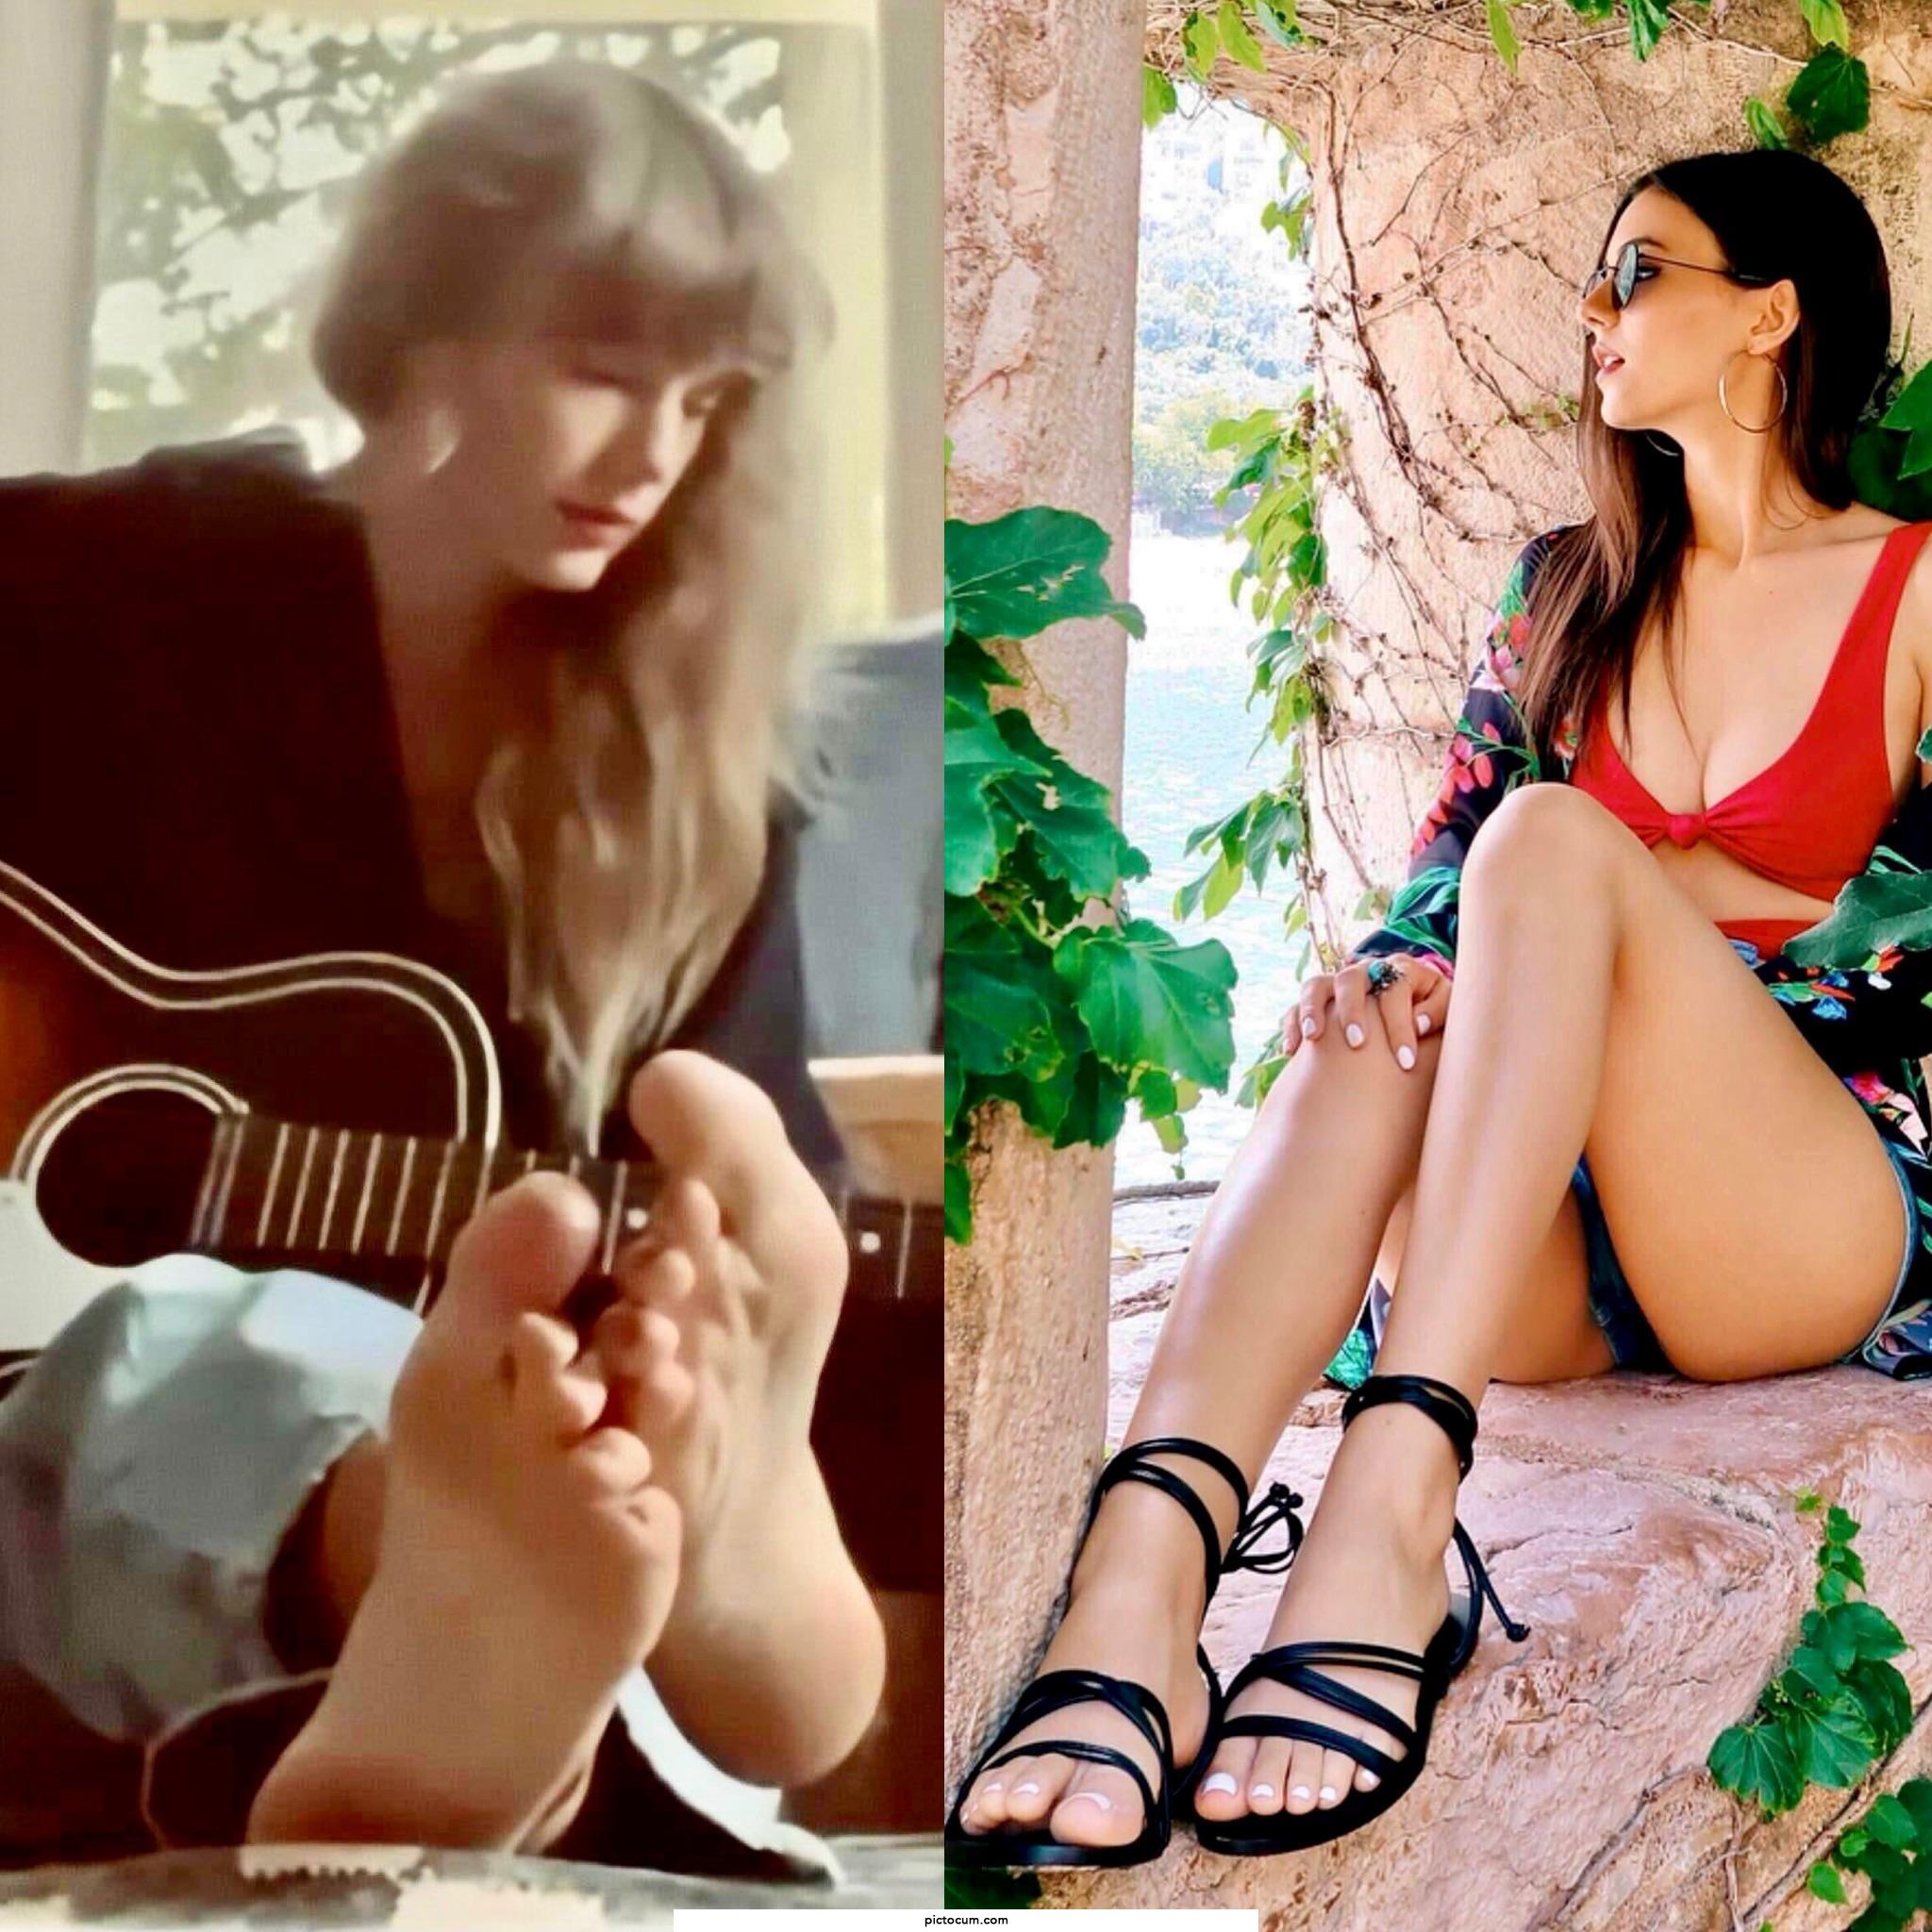 So horny for celeb feet, Taylor and Victoria have some of the best